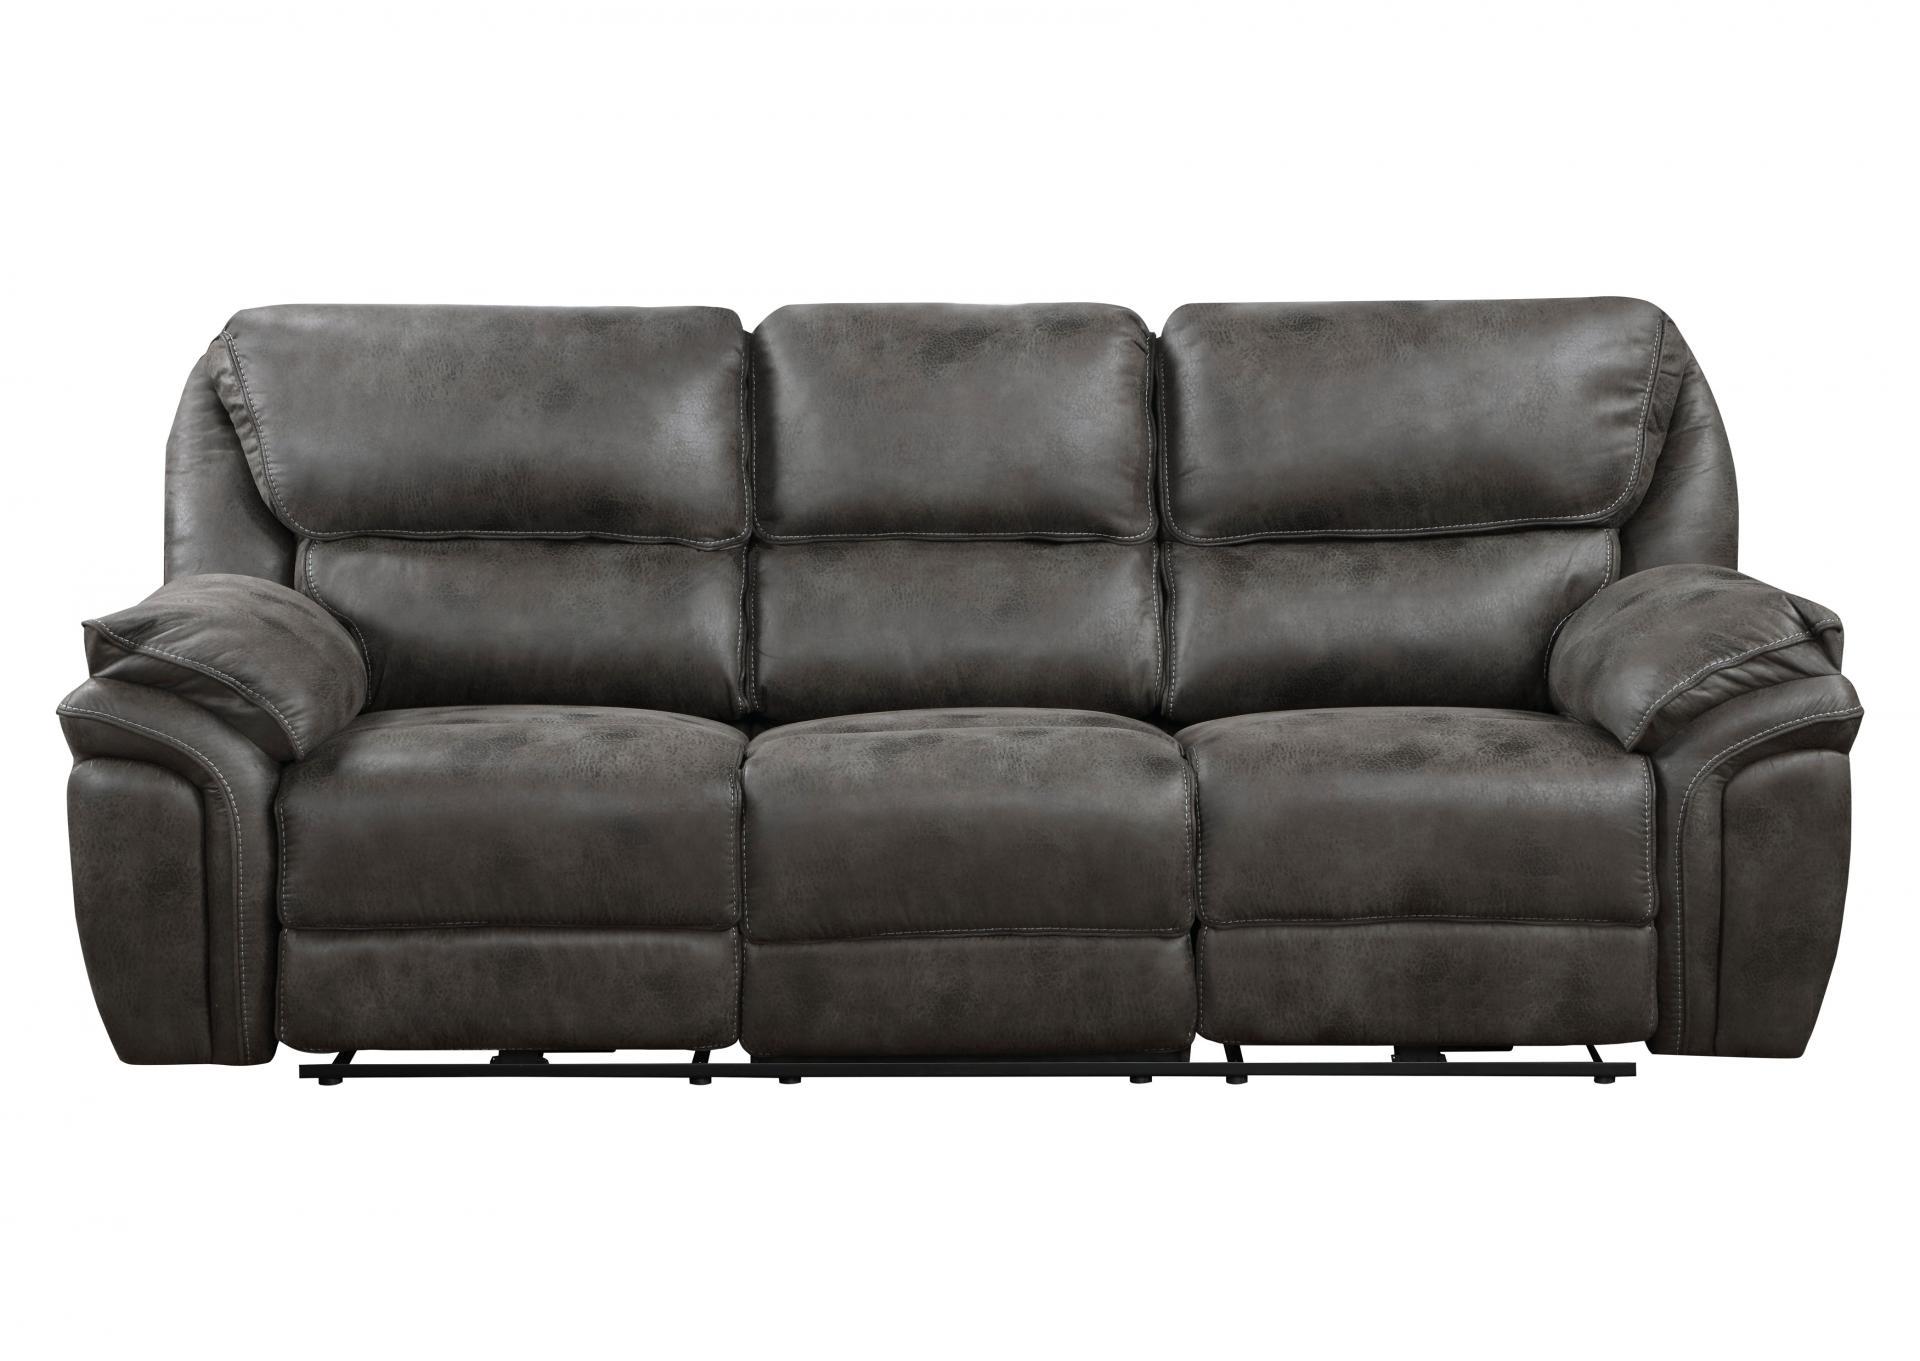 Proctor Double Reclining Sofa in Gray,Homelegance